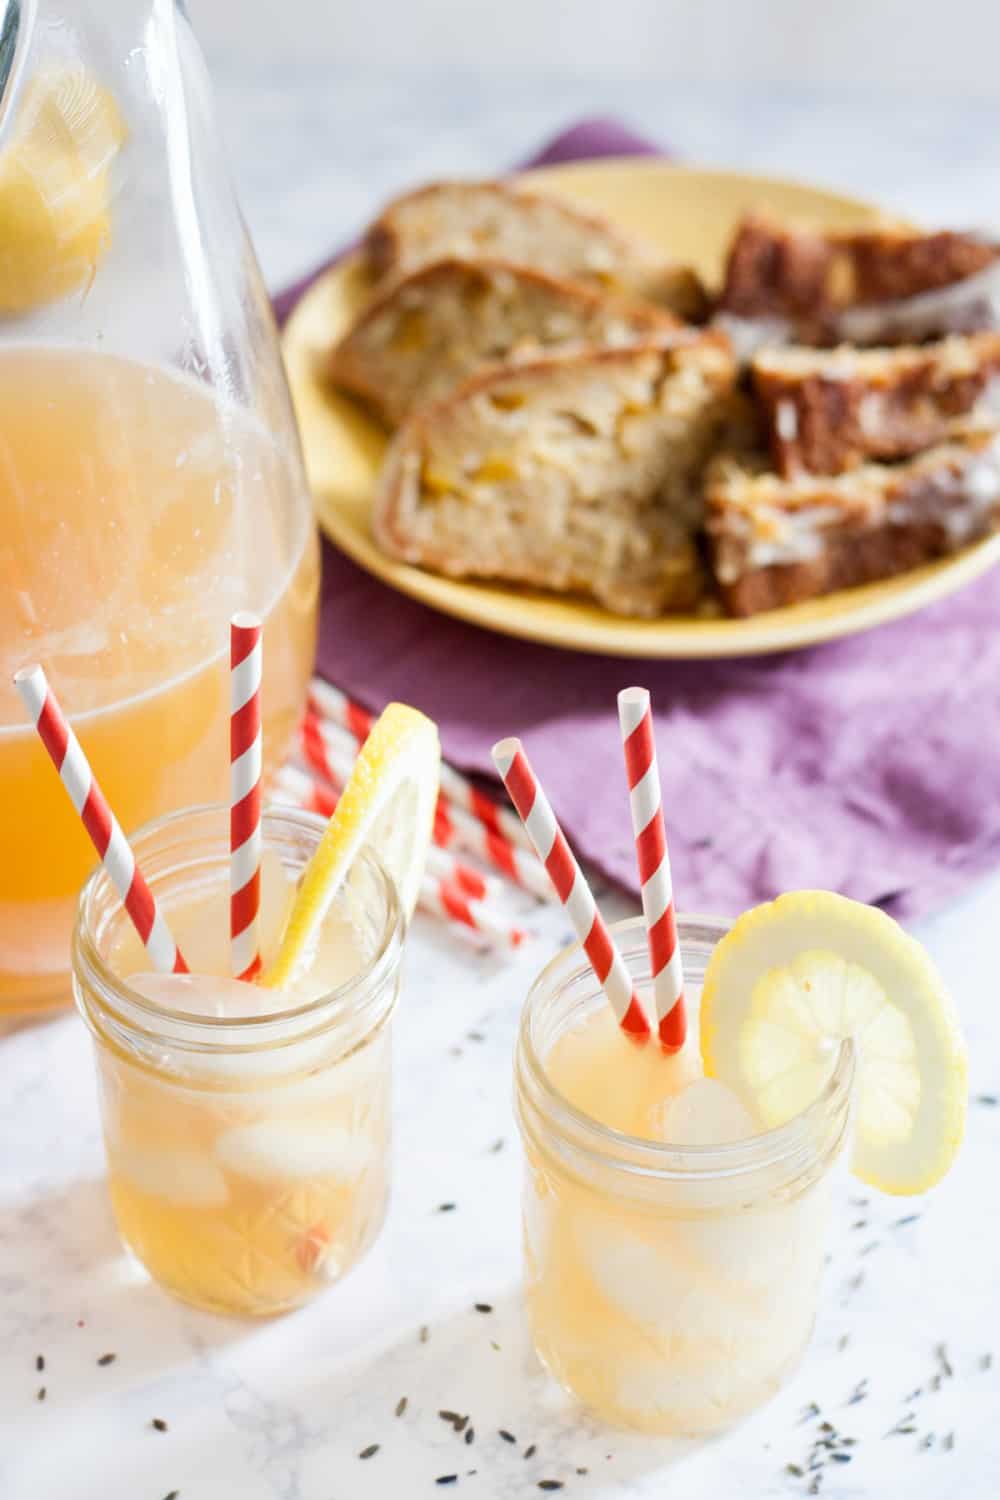 Sweeten your summer lemonade with honey, and add a floral flavor with lavender. Honey, lemon, and lavender are a classic flavor combination that comes together beautifully in this raw honey lavender lemonade recipe!  * GoodieGodmother.com